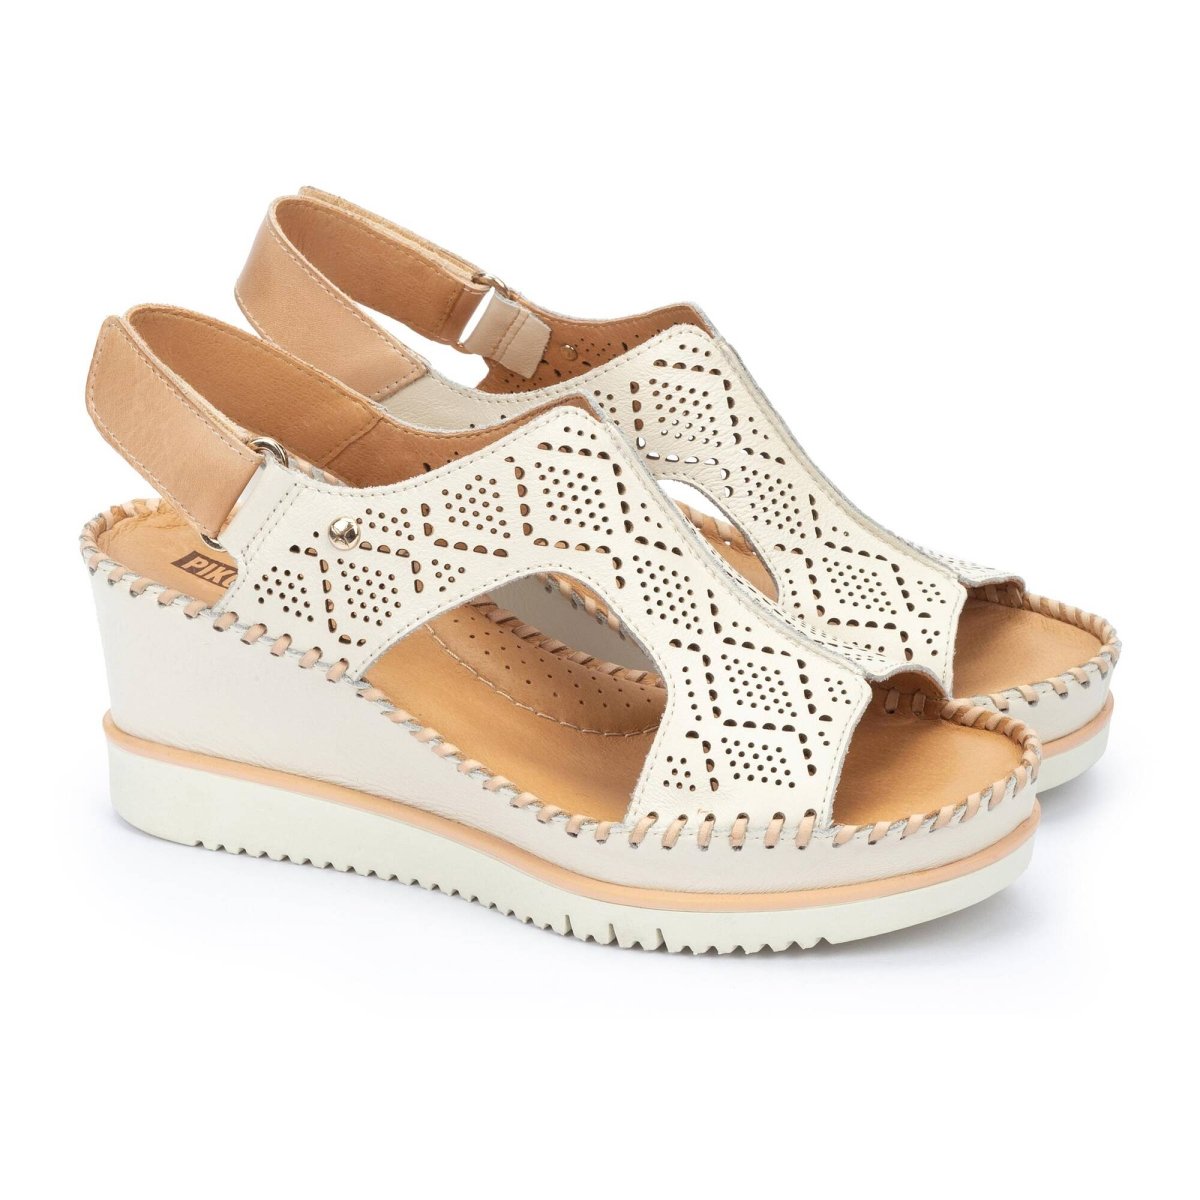 PIKOLINOS AGUADULCE W3Z-1775C1 WOMEN'S WEDGE SANDAL IN NATA - TLW Shoes